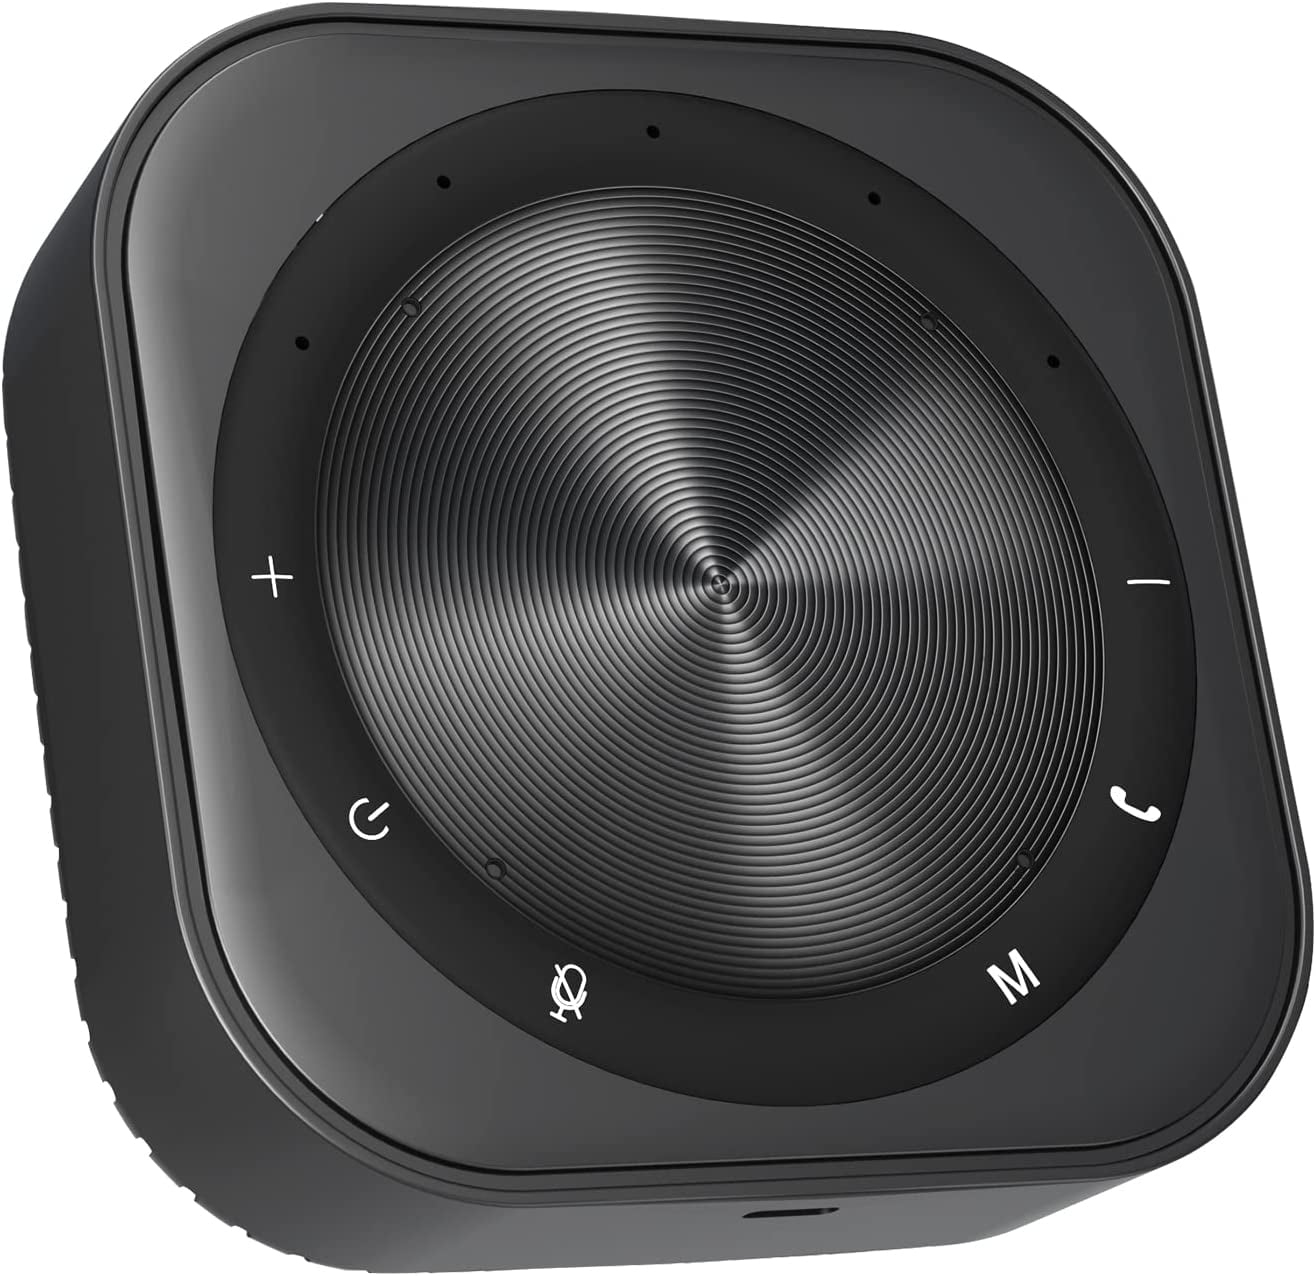 TIBURN Conference Speaker HQ M520 Speaker with Microphone Bluetooth ...